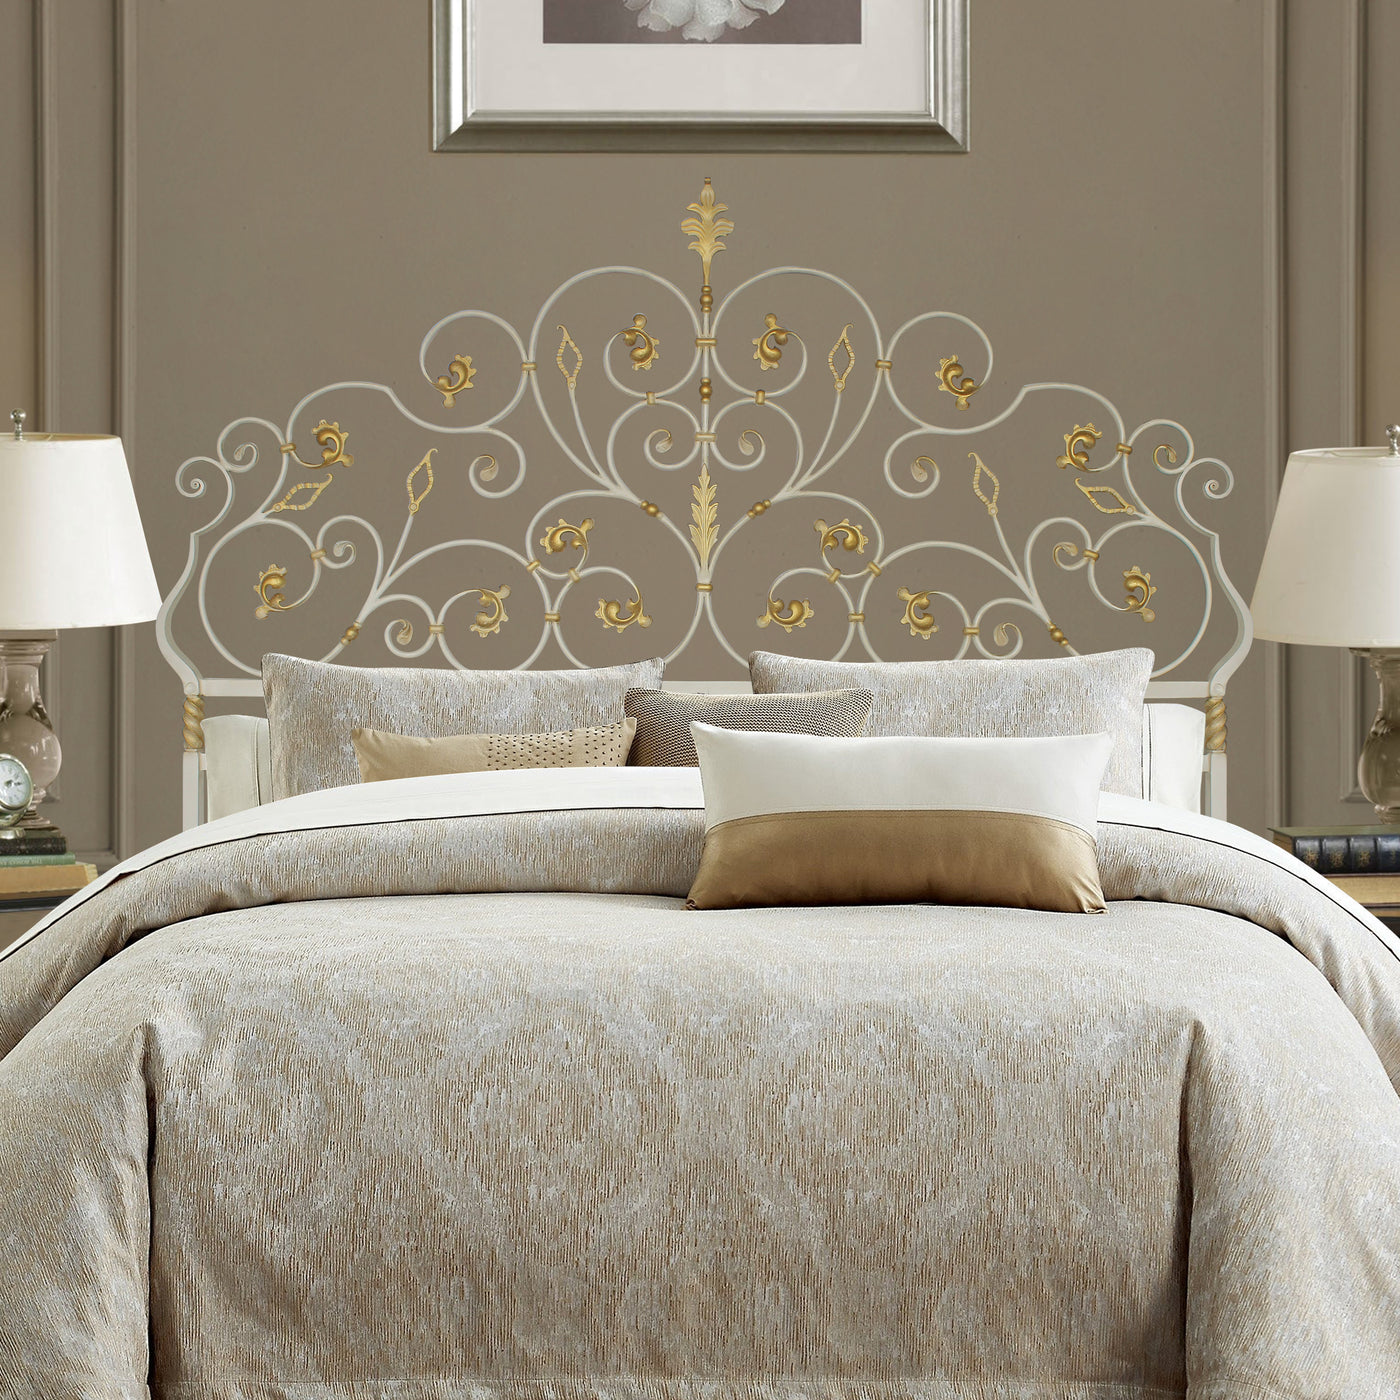 A luxurious wrought iron double bed inspired by nature; with scrolls and leaves painted in an antique white color